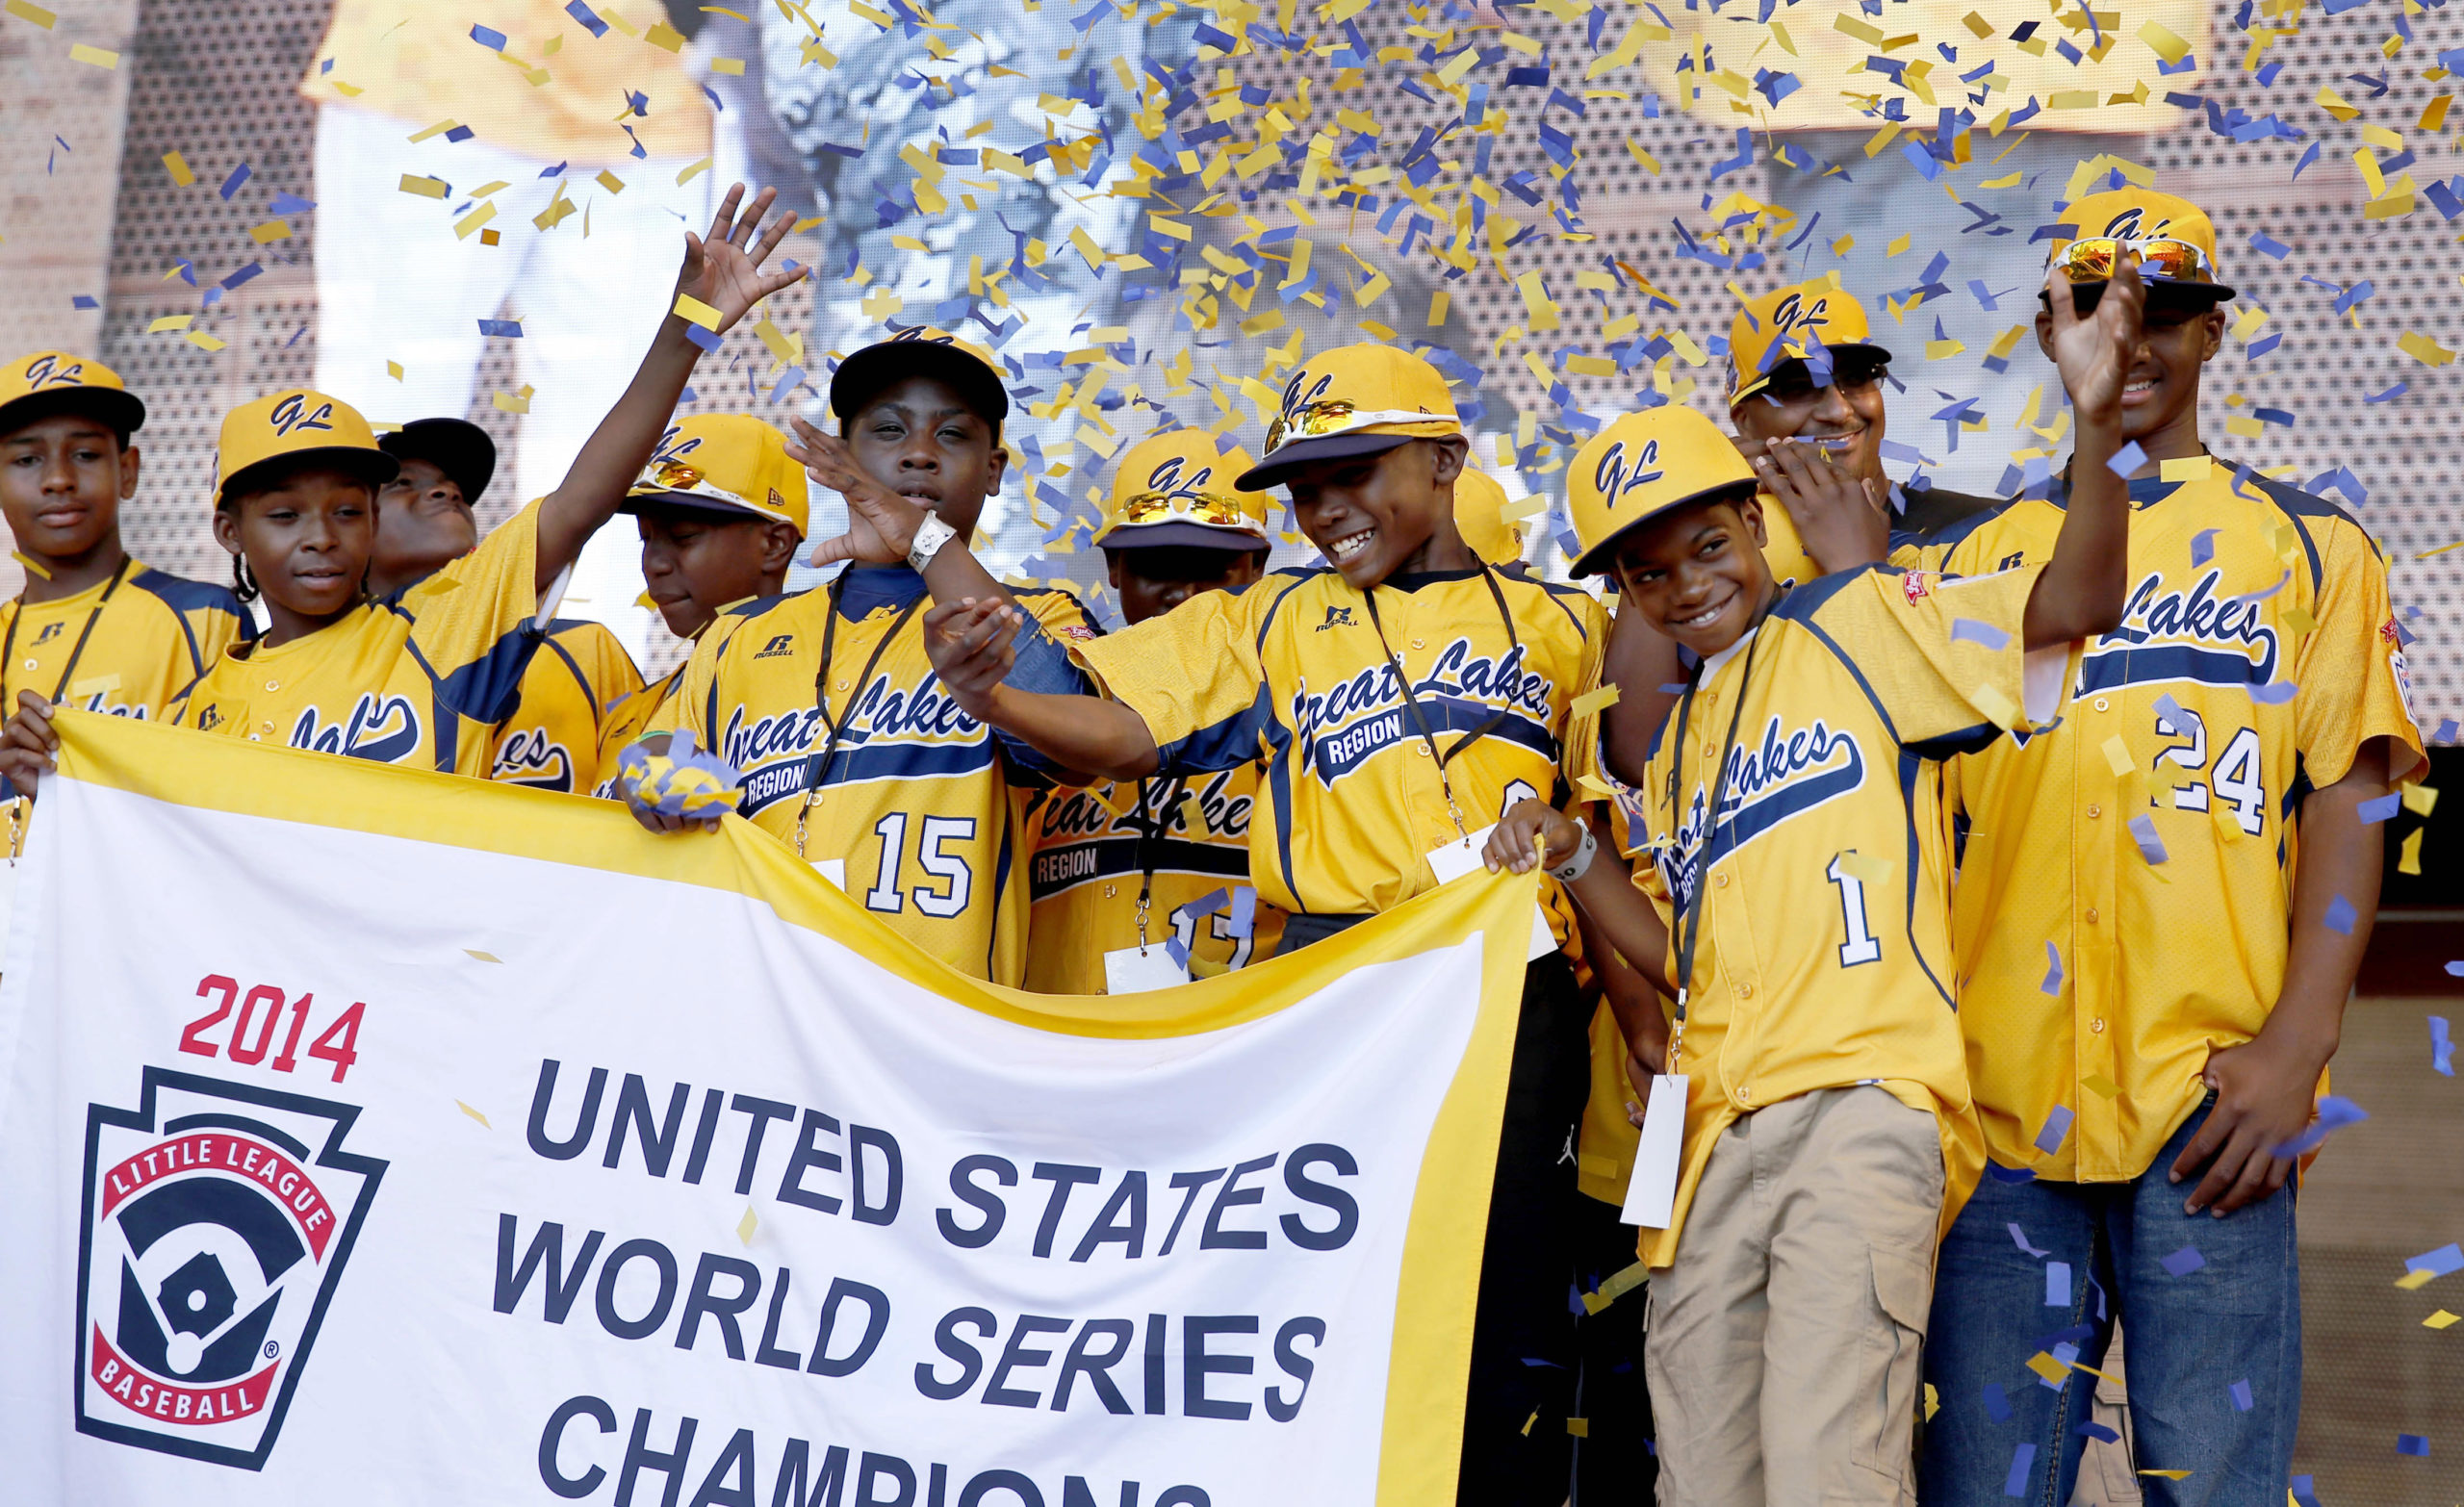 Members of the Jackie Robinson West All Stars Little League baseball team participate in a rally in Chicago celebrating the team's U.S. Little League Championship, Aug. 2014. Joseph Haley founded the little league program in Chicago's South Side